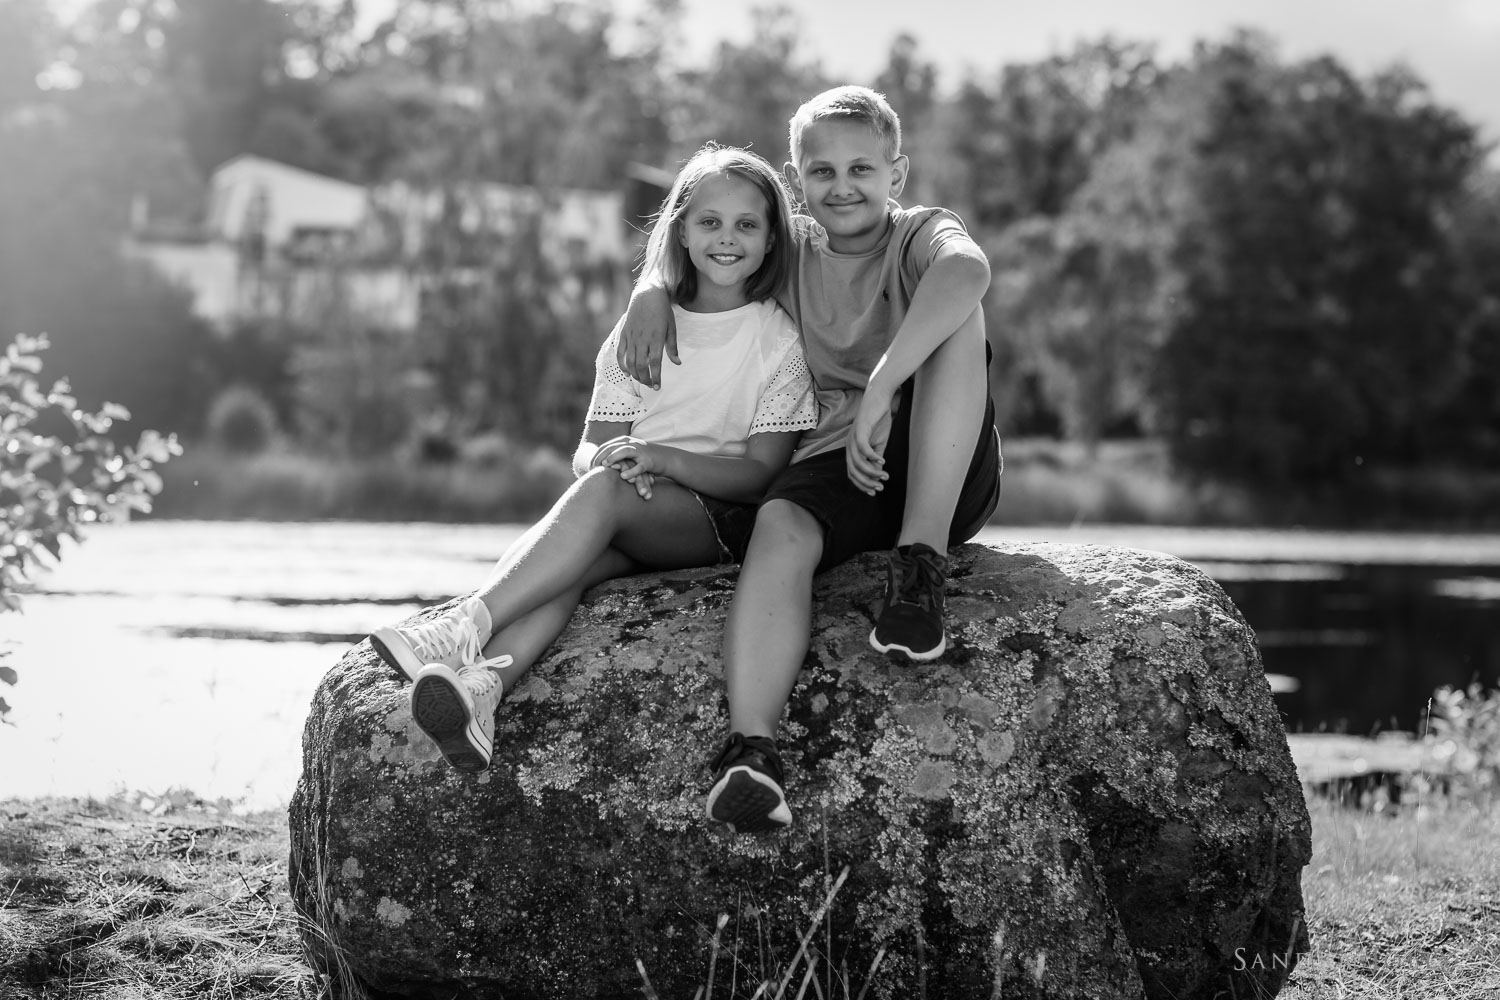 stockholm-sibling-photo-session-by-child-photographer-sandra-jolly.jpg